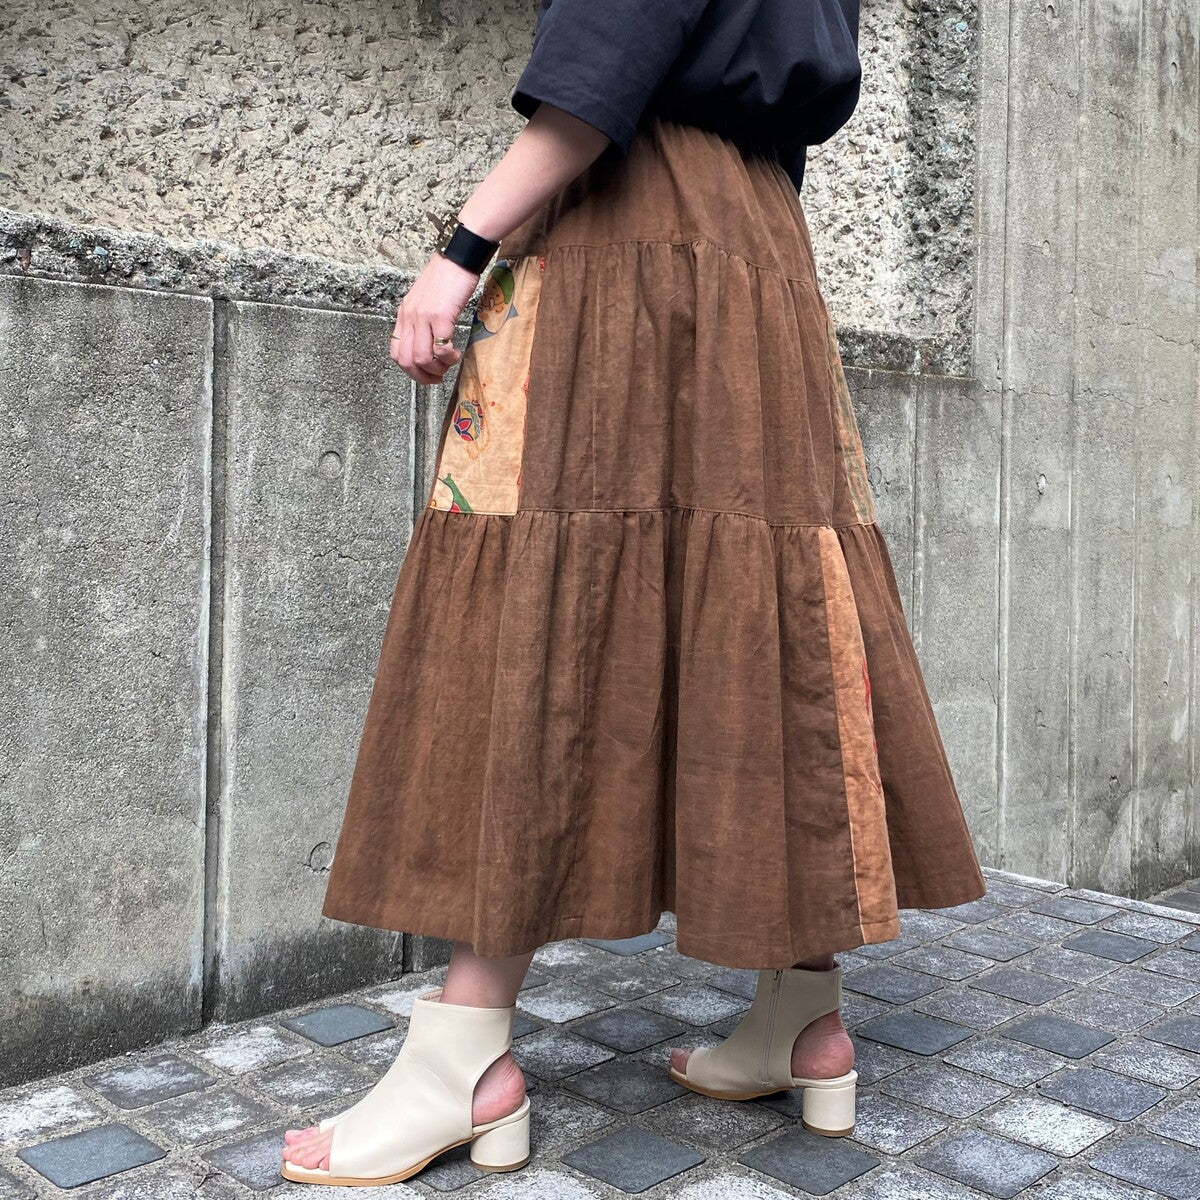 [Persimmon mud dyed skirt] Tiered skirt